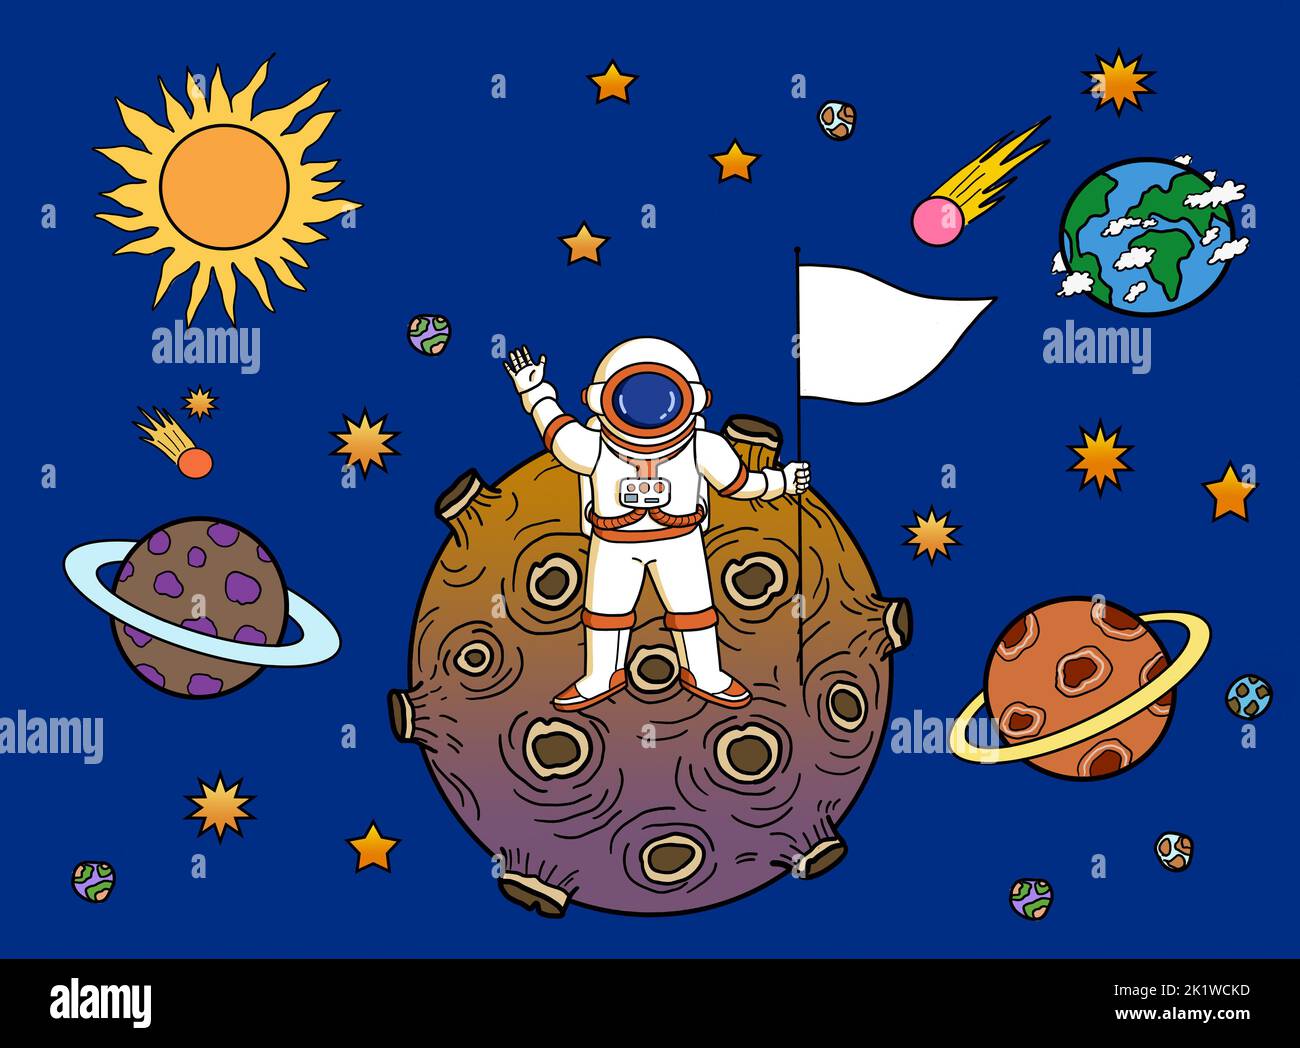 An astronaut holding a white flag standing on a planet. Success goal achievement leadership in space and technology concept. Stock Photo